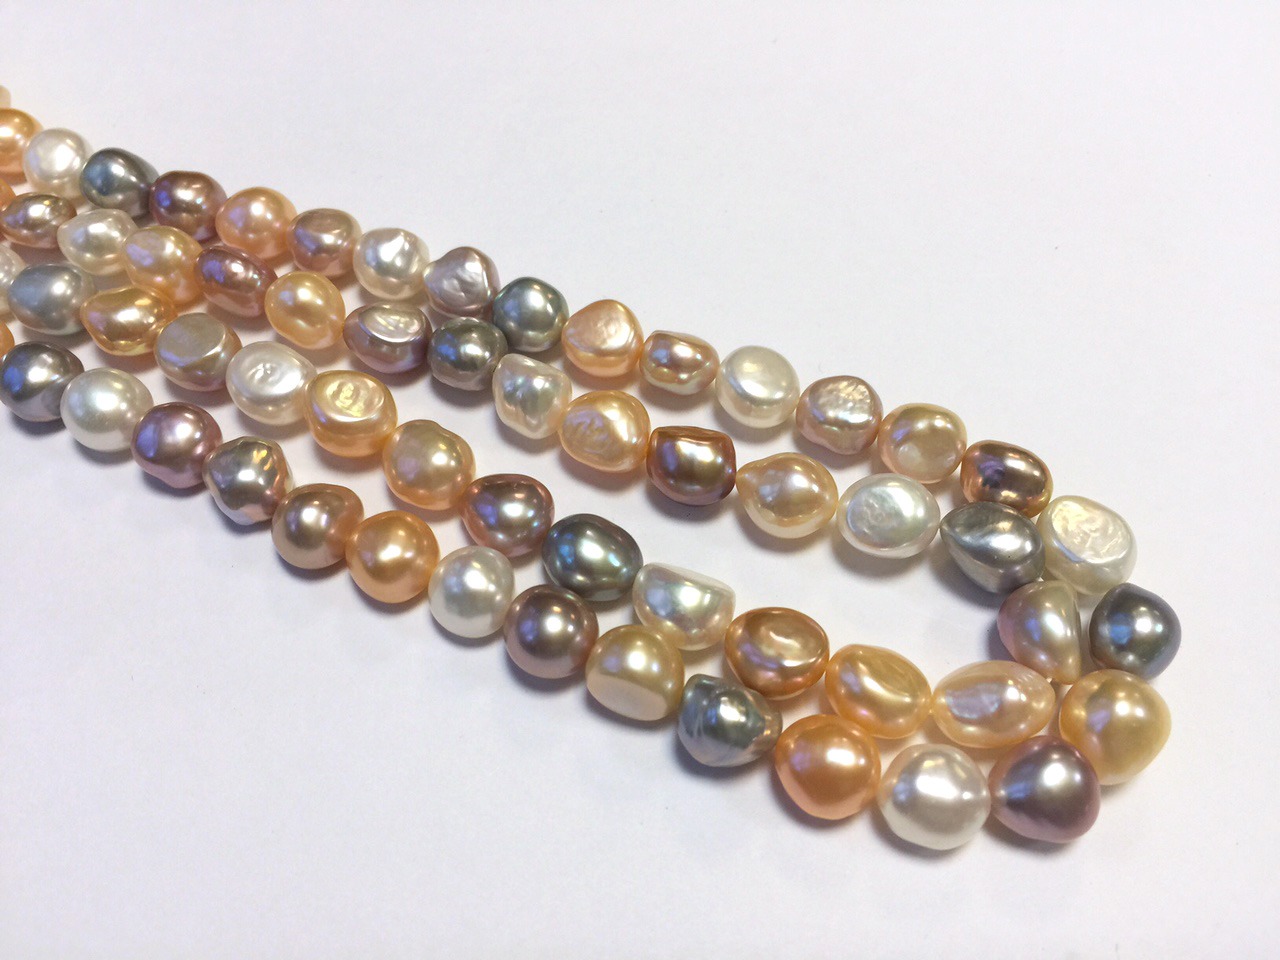 Mixed Natural Colour And Dyed Freshwater Pearls – Precious Stones, Semi ...